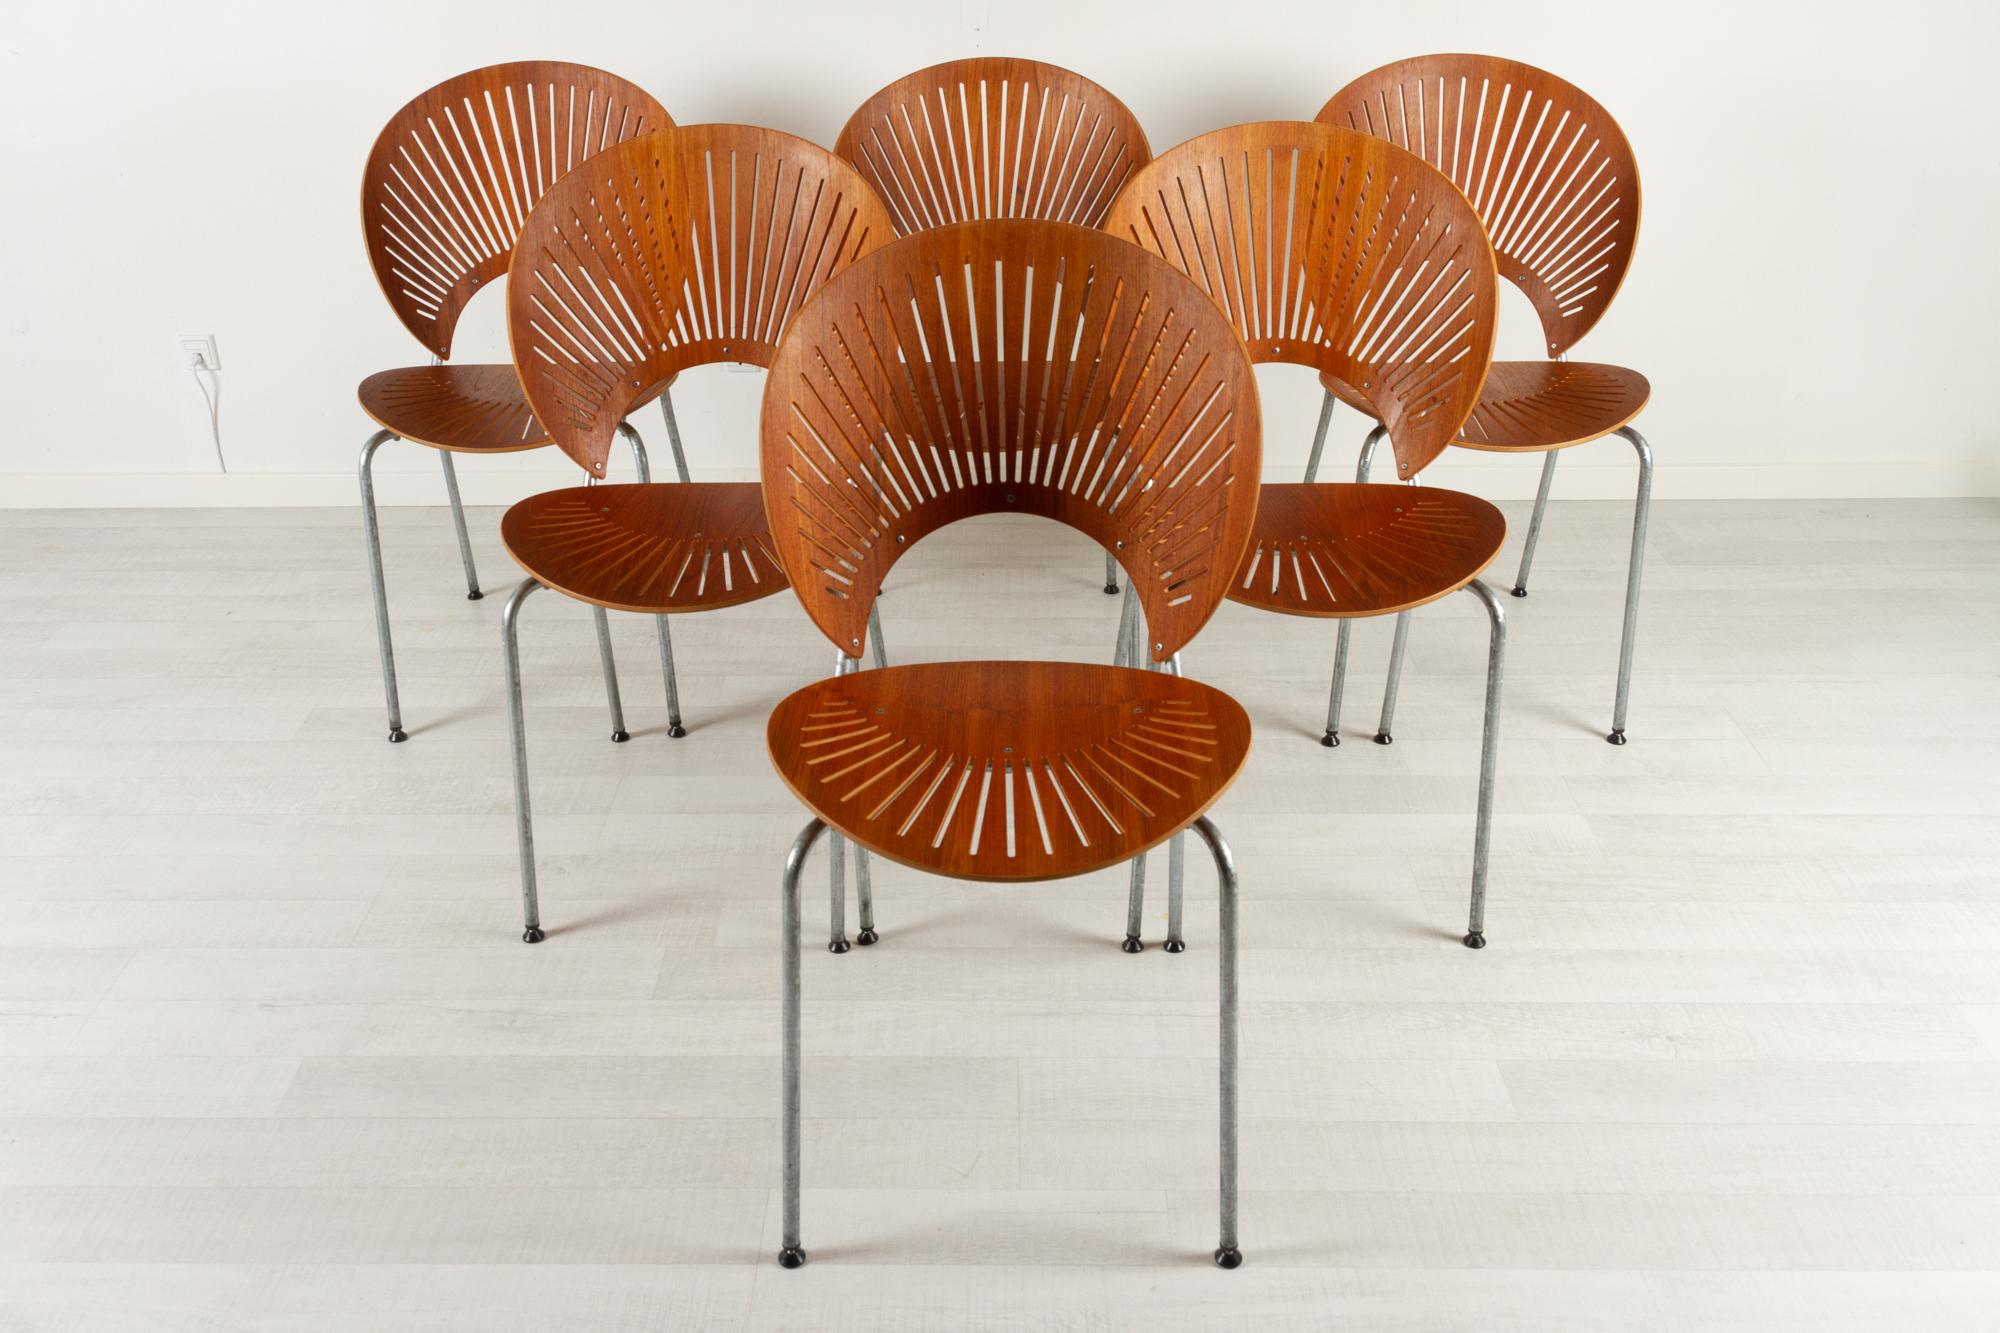 Trinidad teak dining chairs by Nanna Ditzel for Fredericia Stolefabrik Denmark 1990s

When designing the Trinidad Chair Model 3298 in 1993, Danish designer Nanna Ditzel found inspiration in the elaborate fretwork from the Gingerbread Facades that